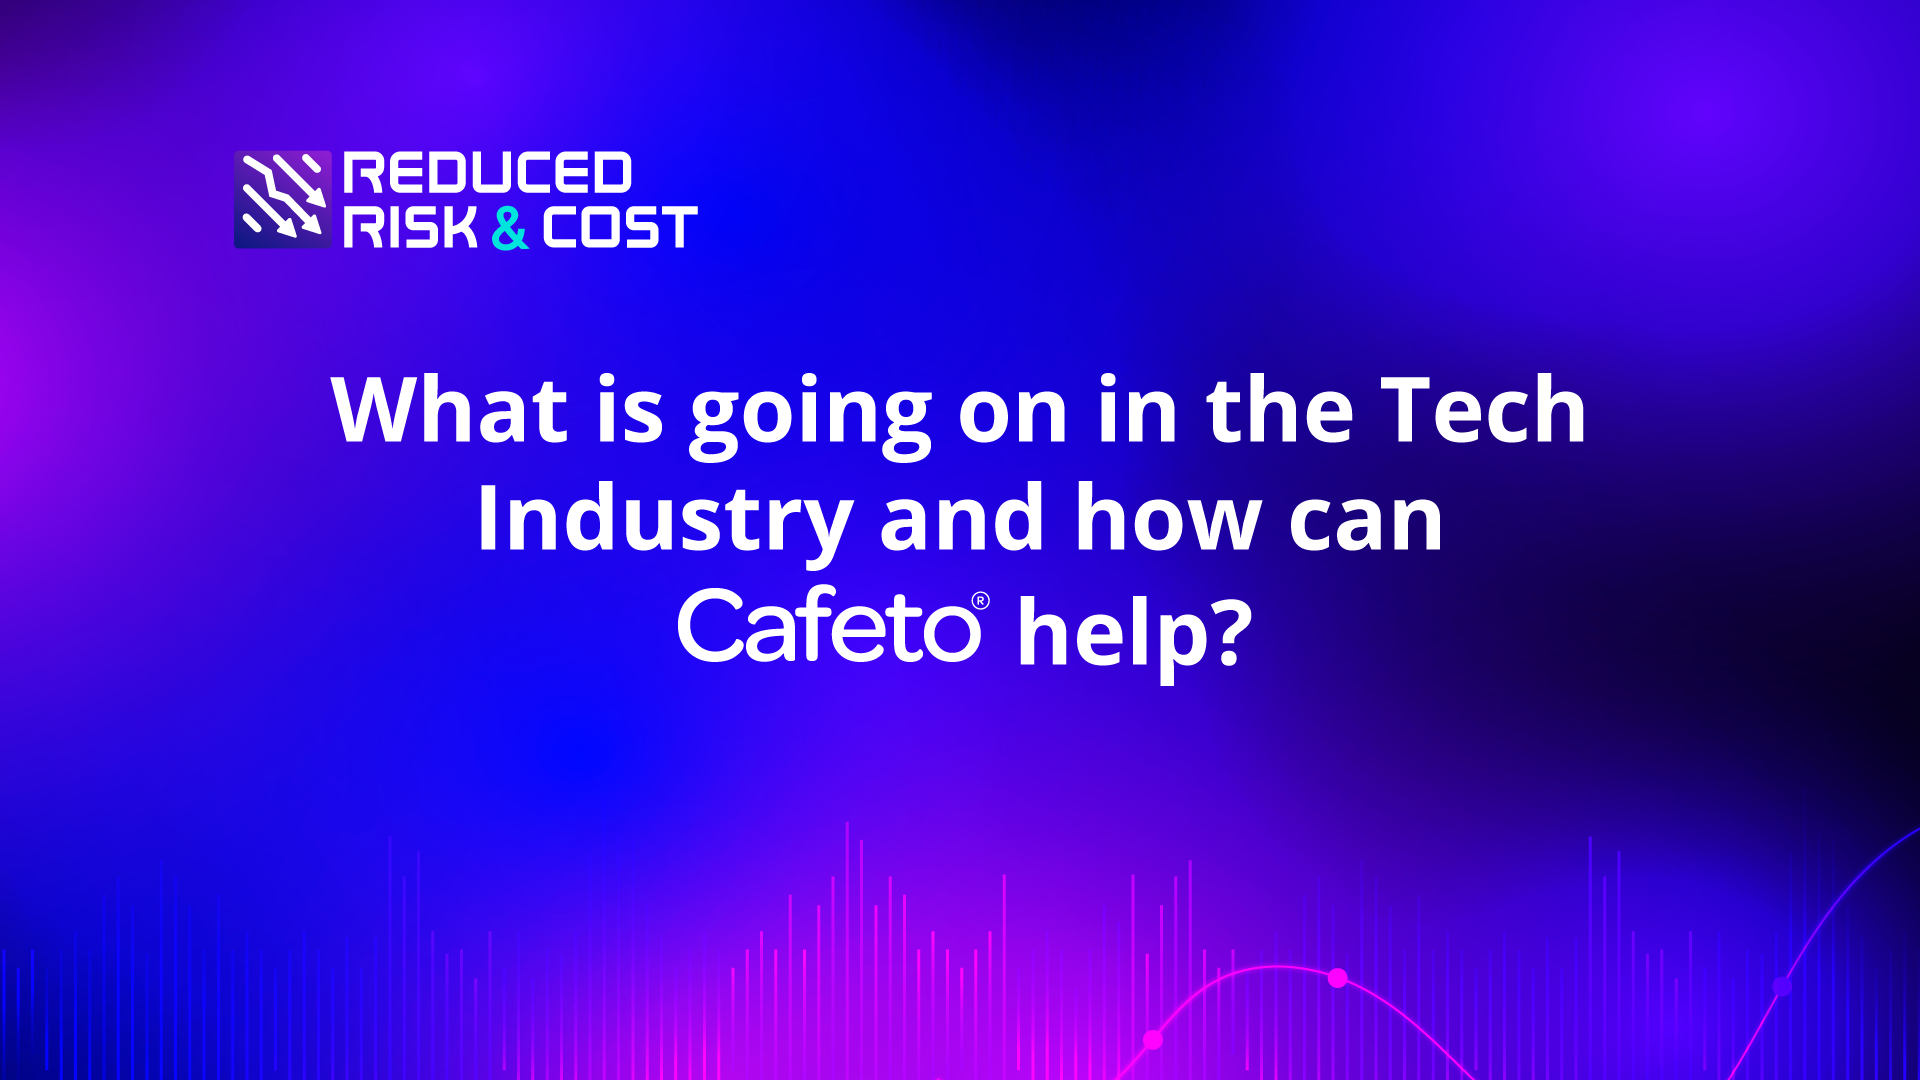 What is going on in the Tech Industry and how can Cafeto help?